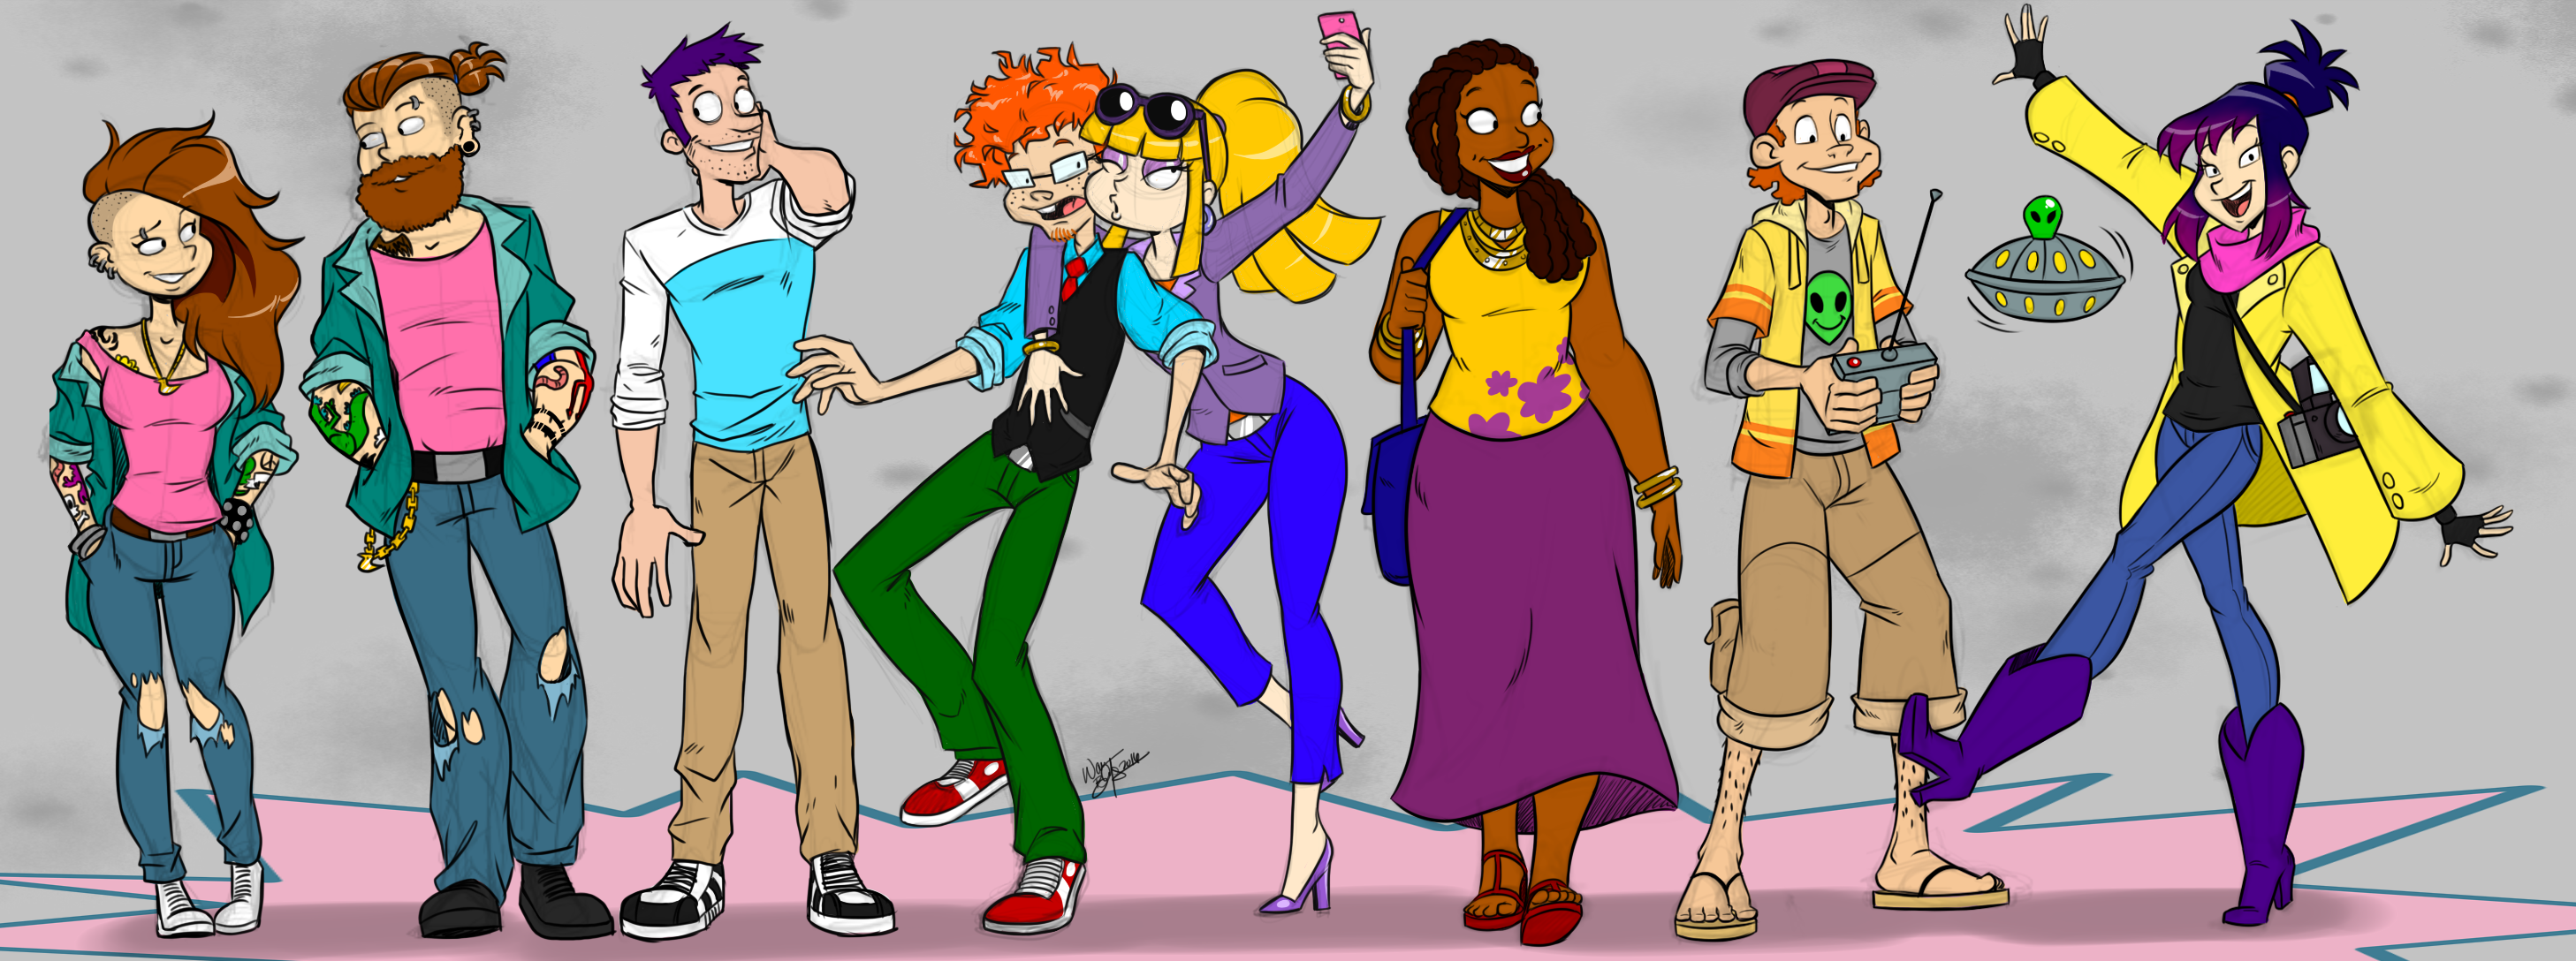 rugrats adults hipsters.png.